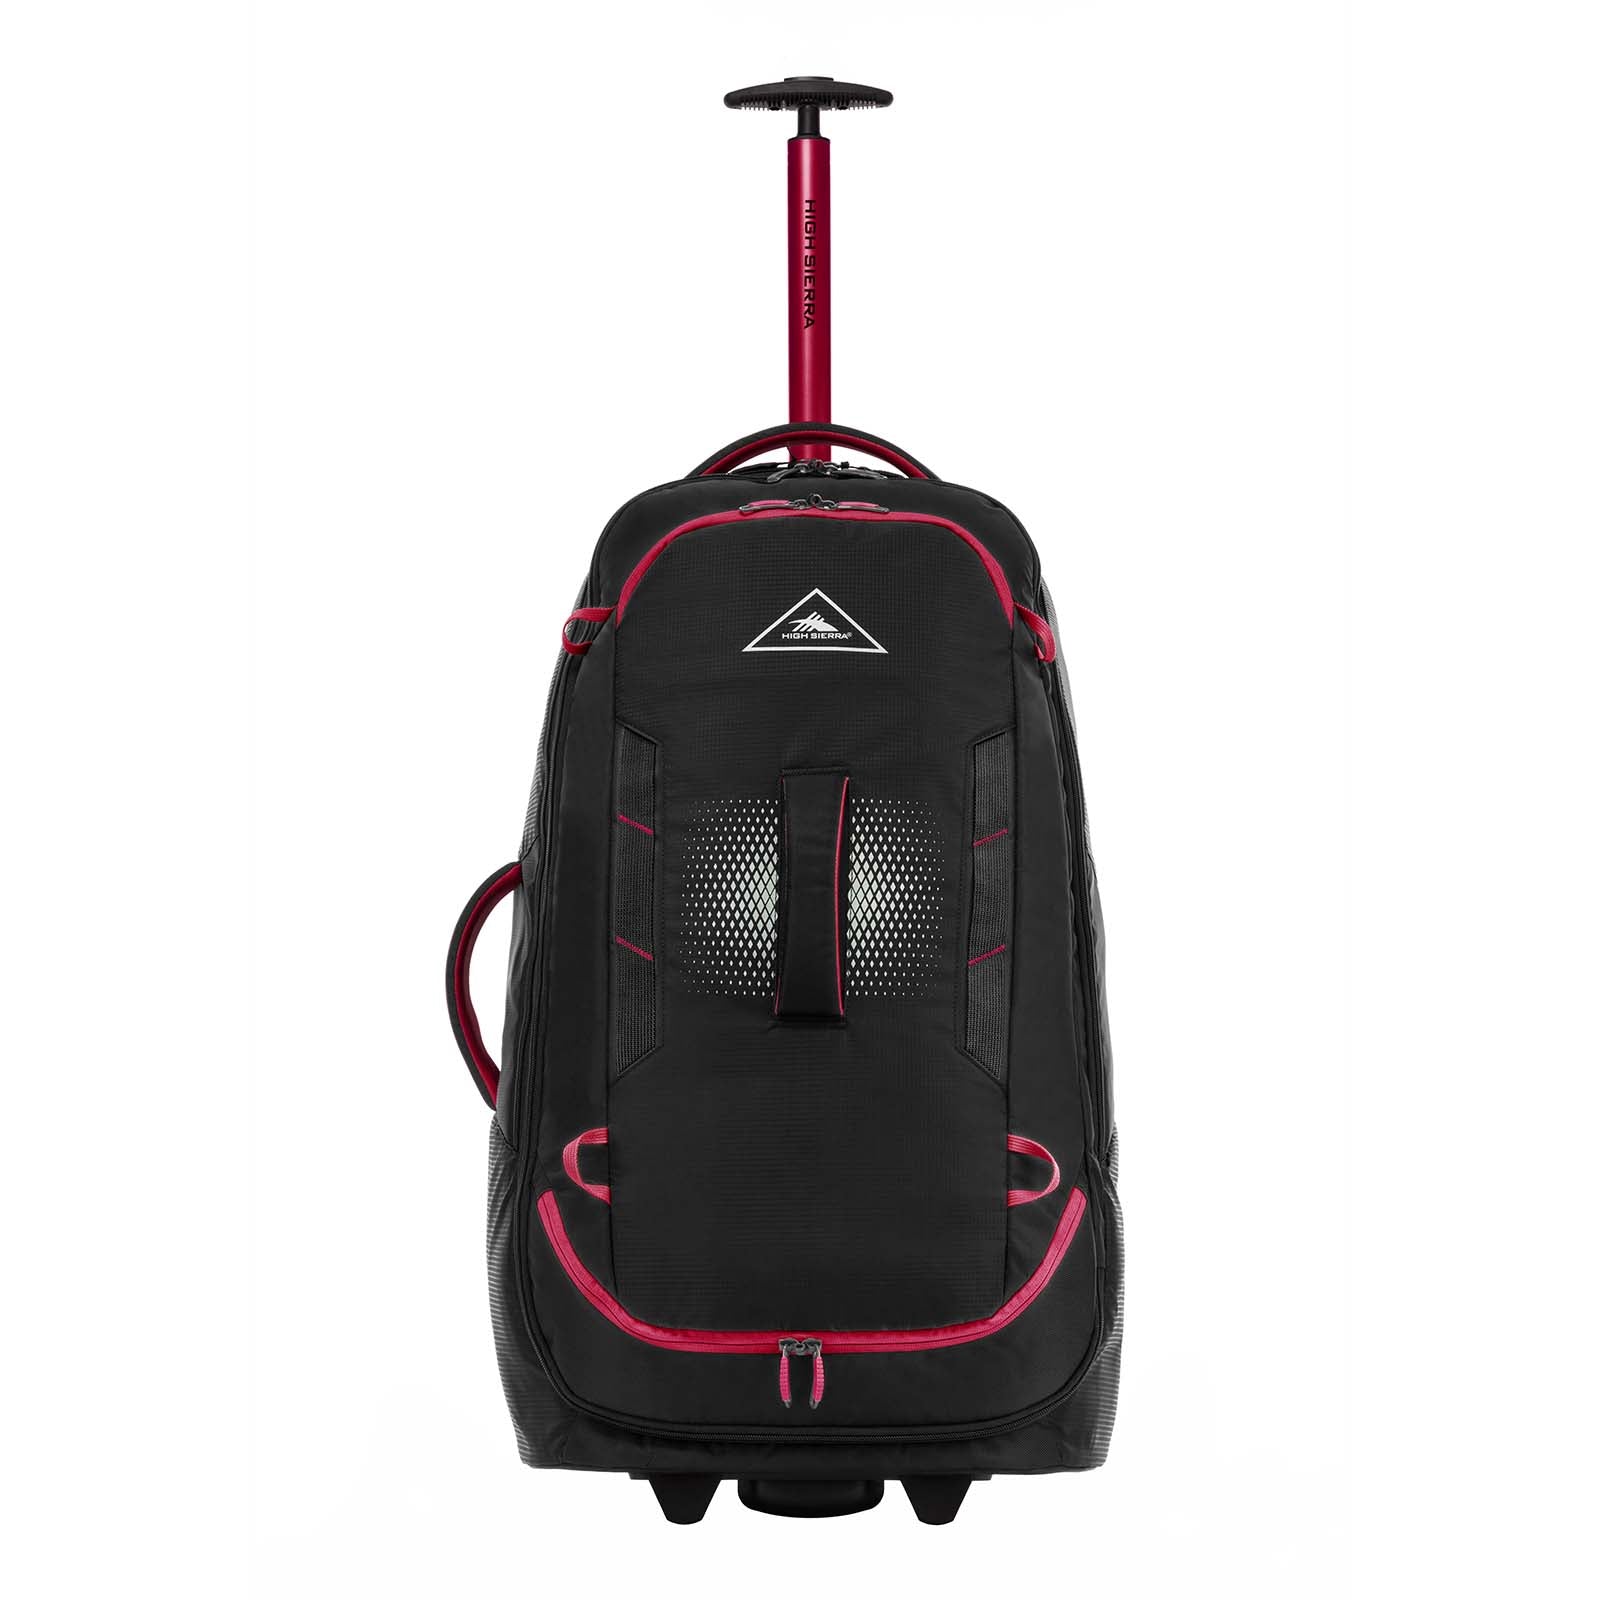    High_Sierra_Composite_V4_76cm_Carry-On_Wheeled_Duffel_Black_Red_Face